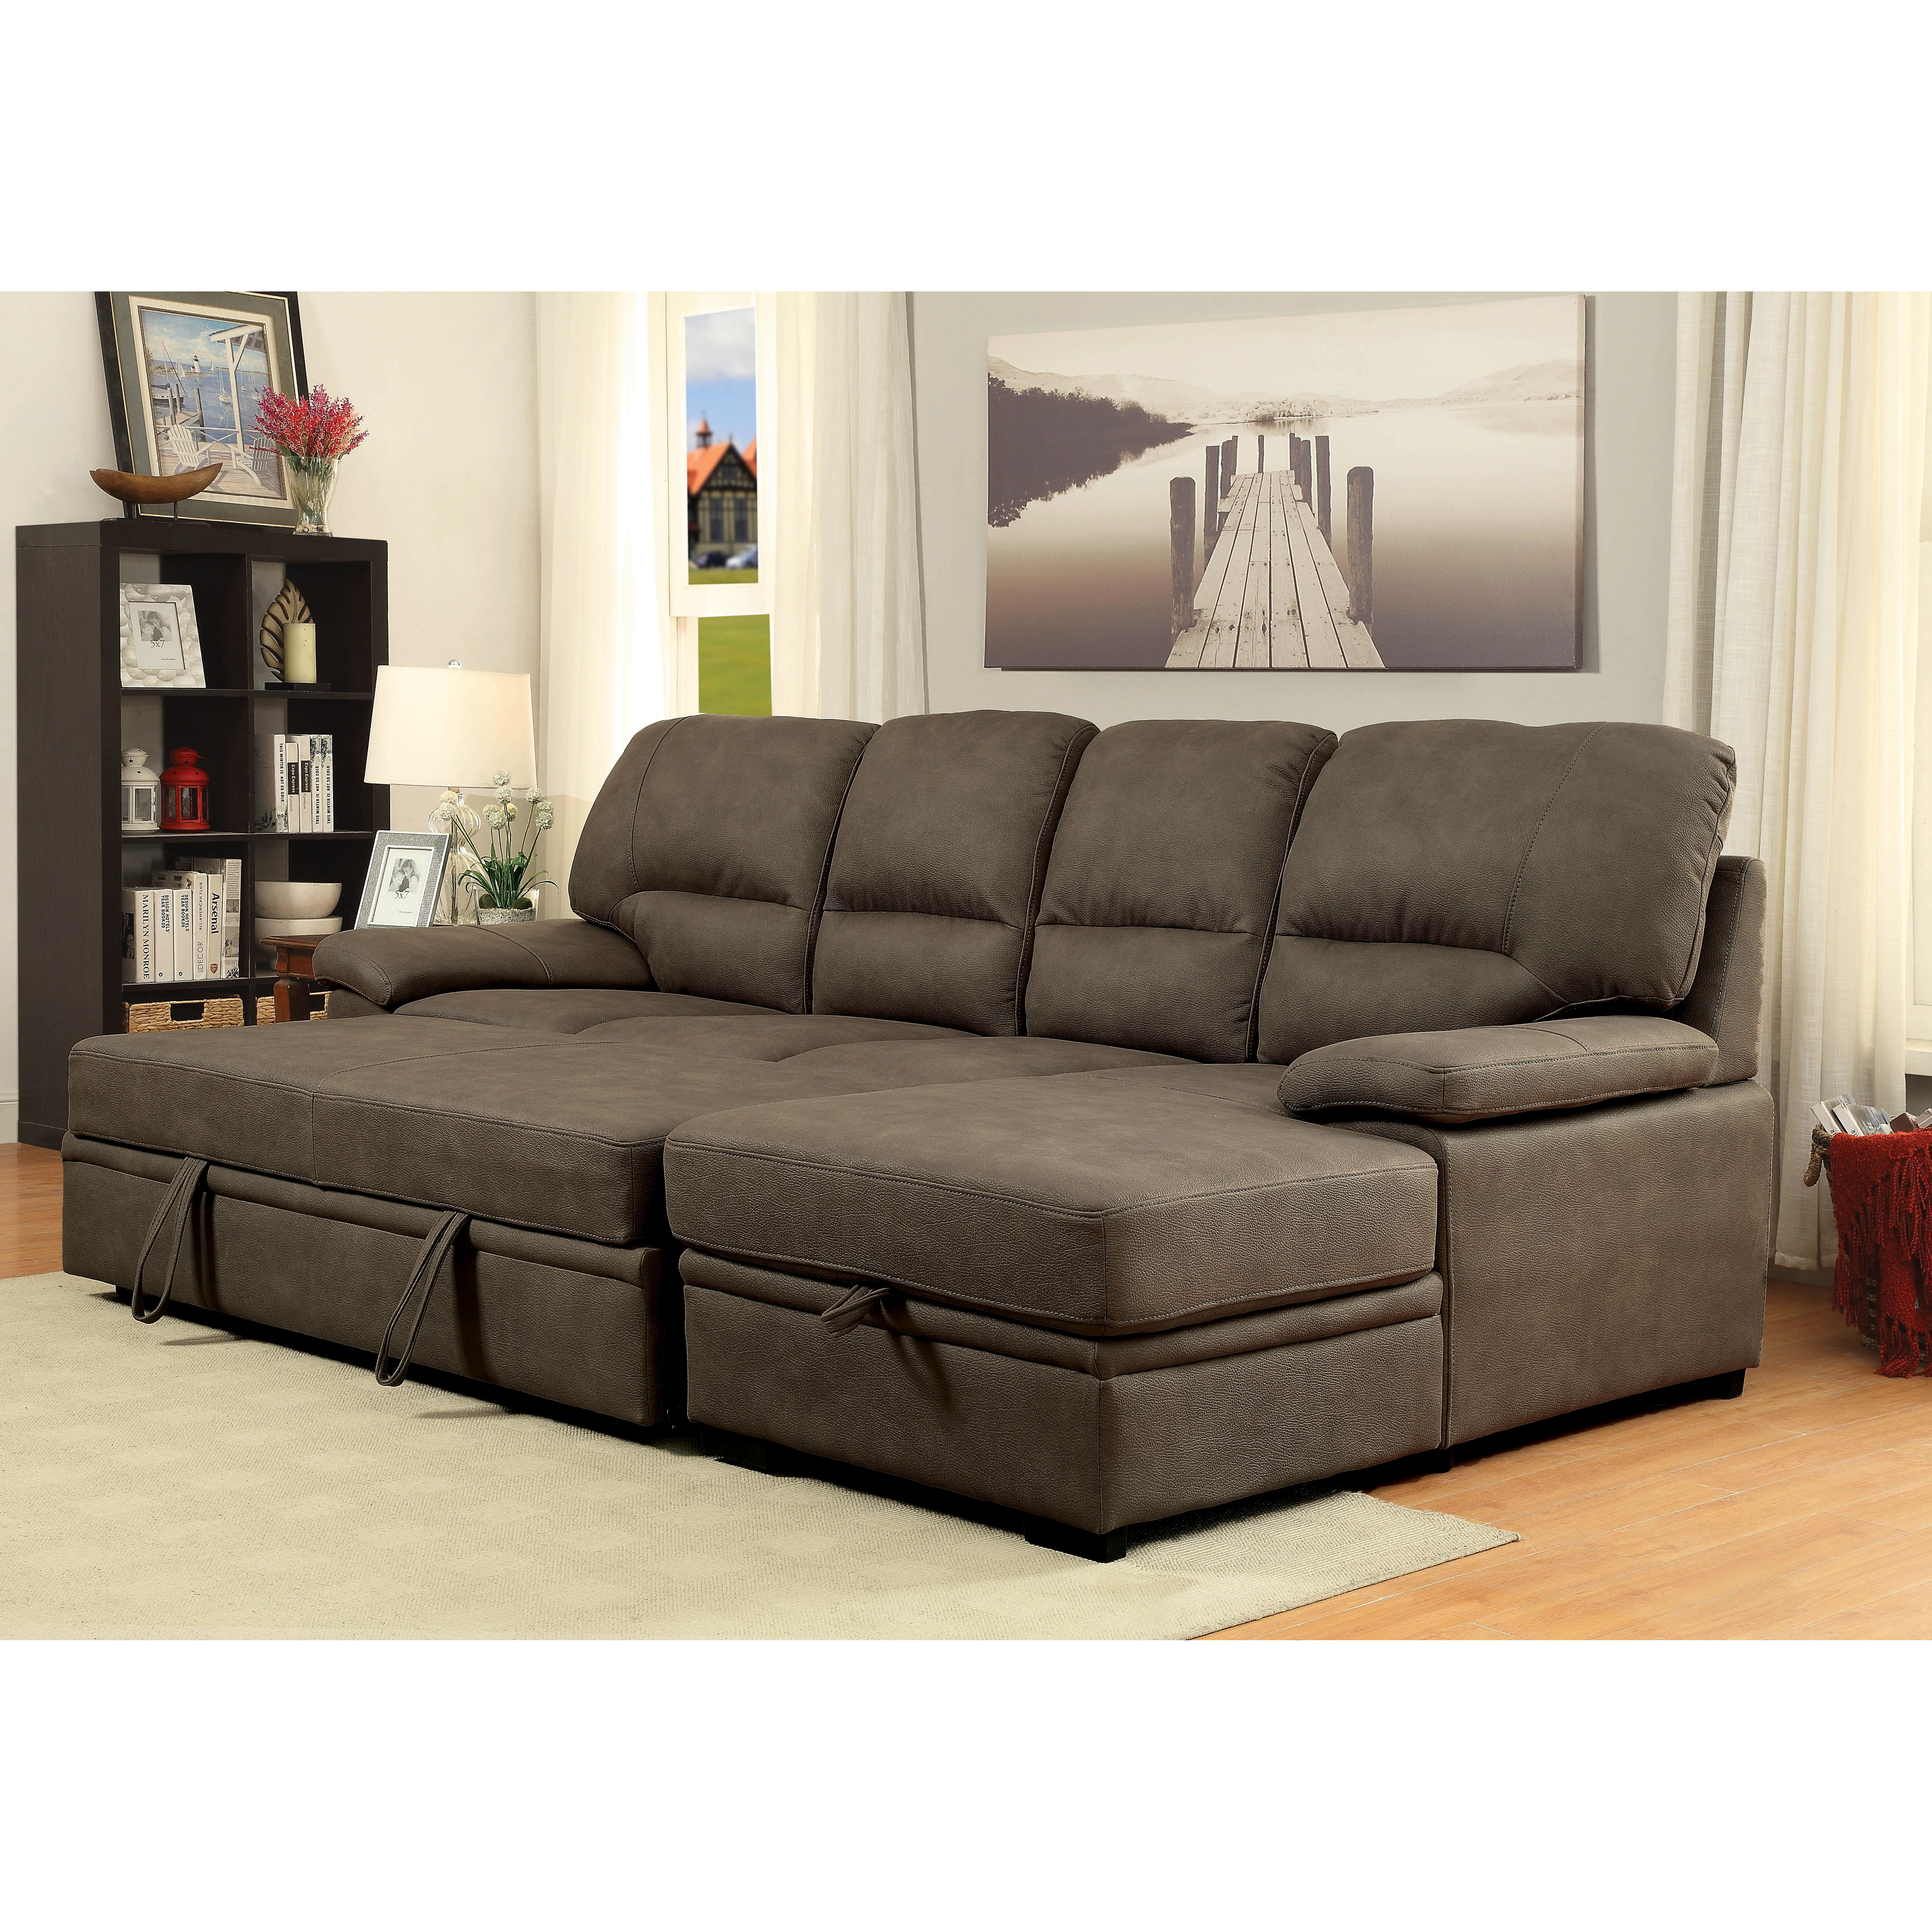 Sofa bed Sectional unique sectional sofa bed 53 in modern sofa ideas with section UYVDTVG